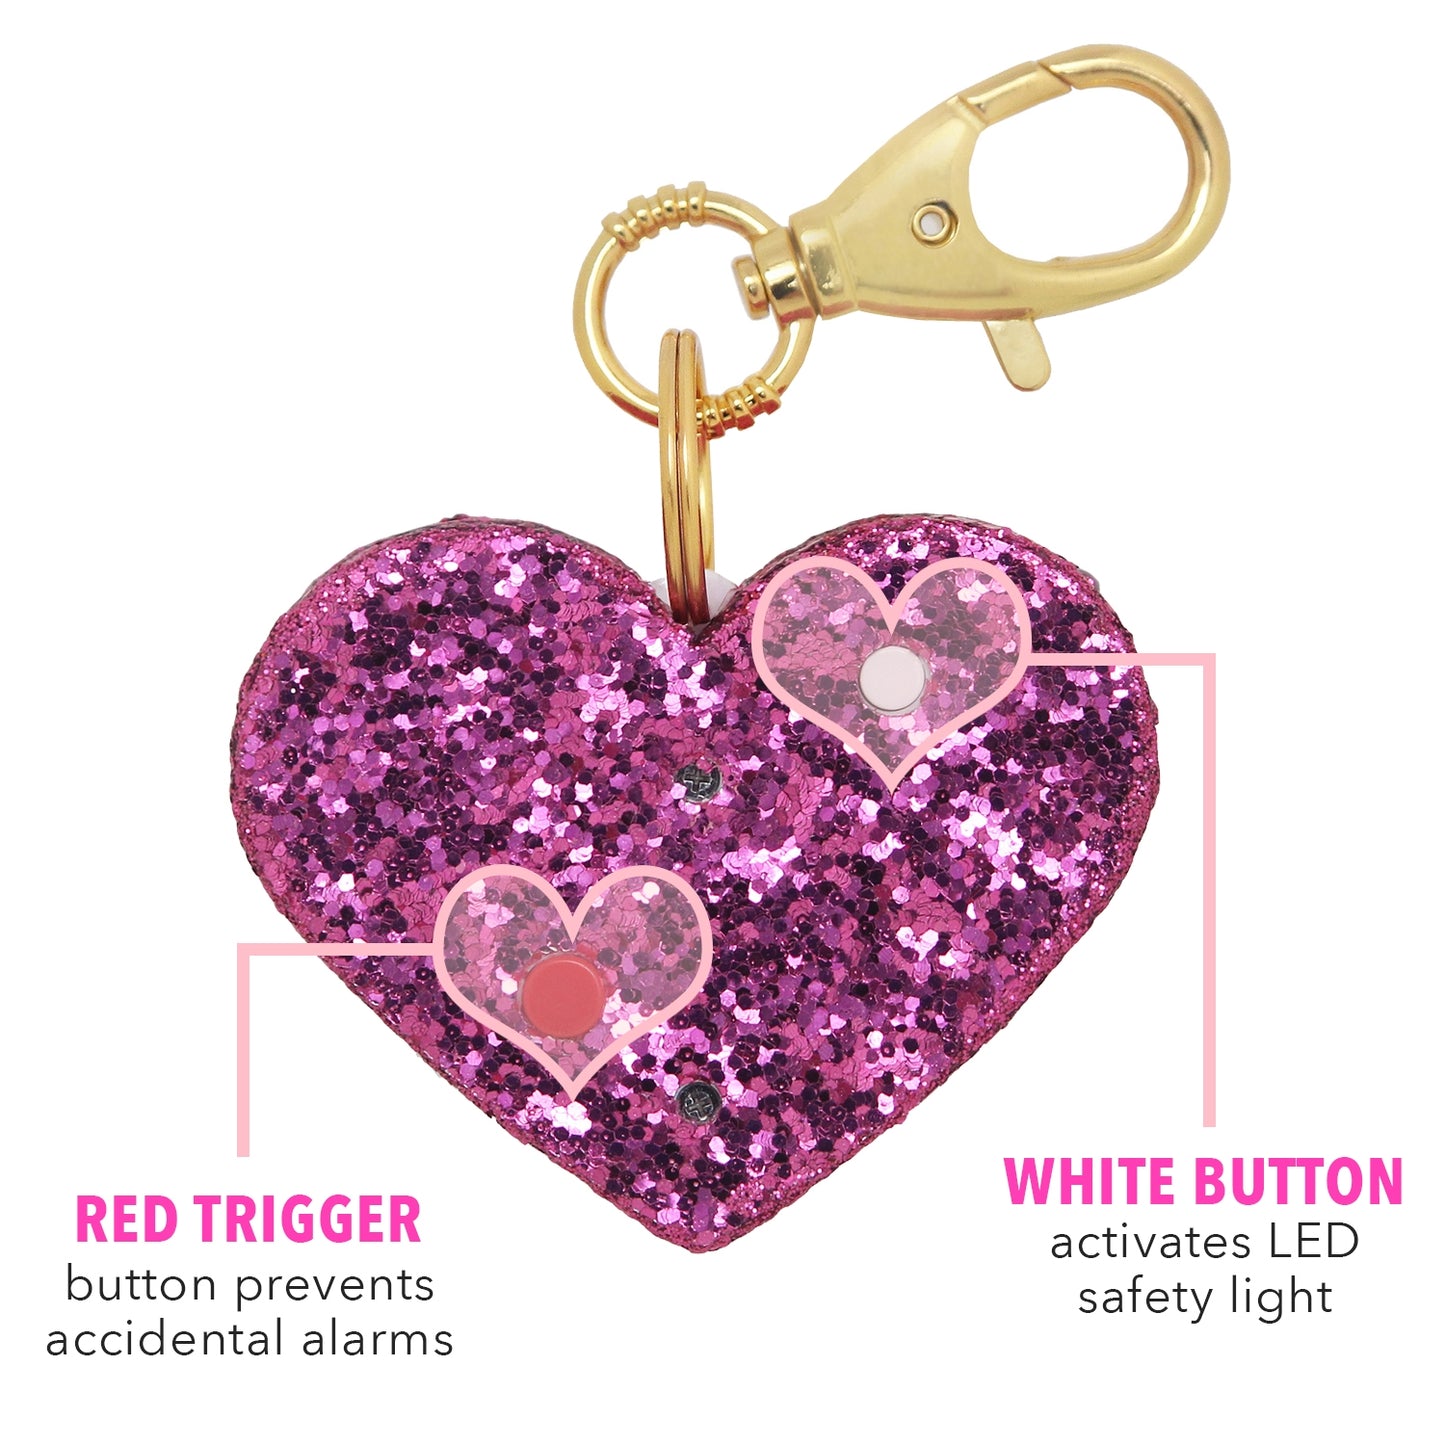 Blingsting Ahh!-larm Personal Safety Alarm Heart Keychain - Pink Glitter